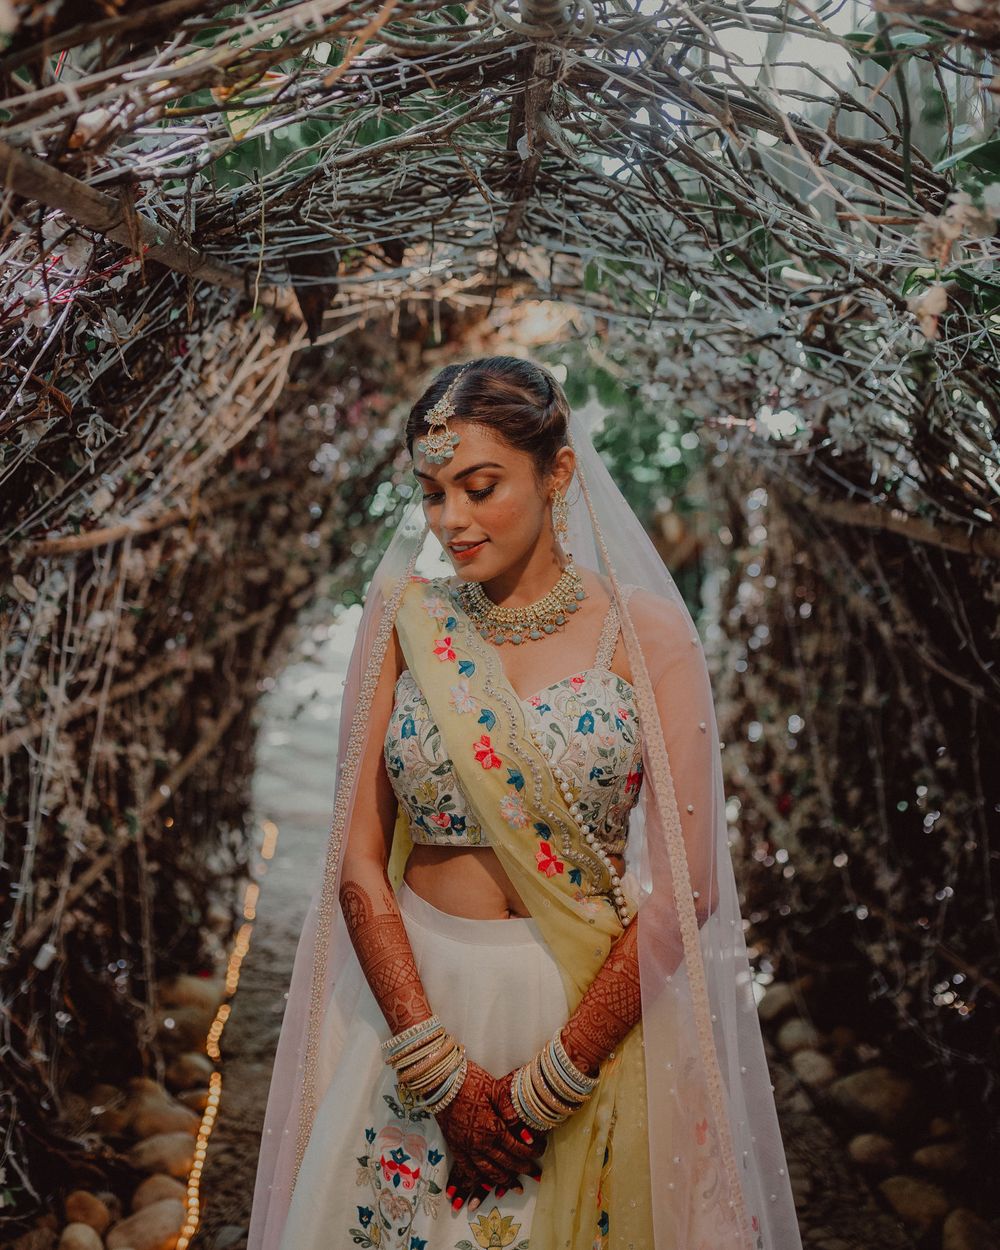 Photo of Bride wearing an ivory lehenga with double dupattas.